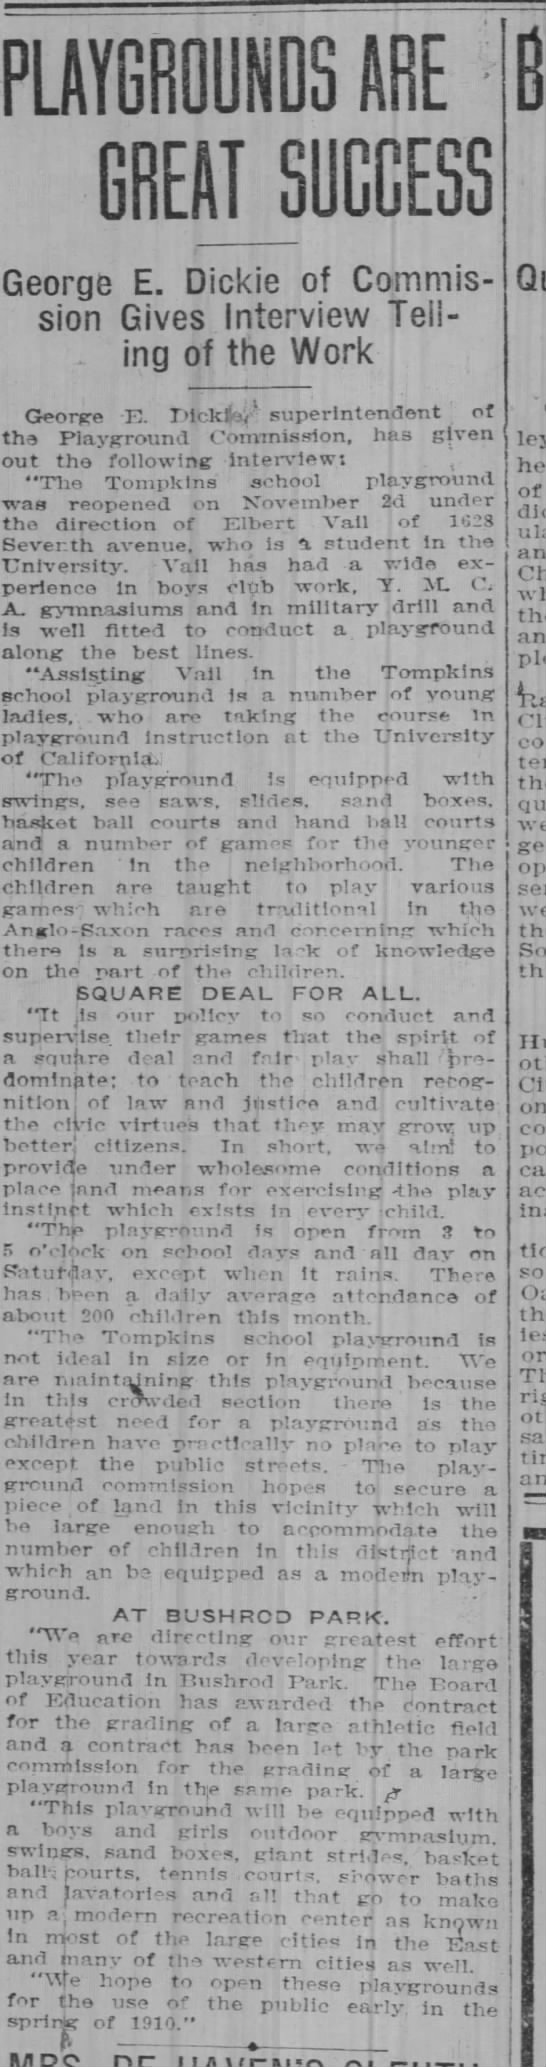 Playgrounds Are Great Success - Nov 24, 1909 - 